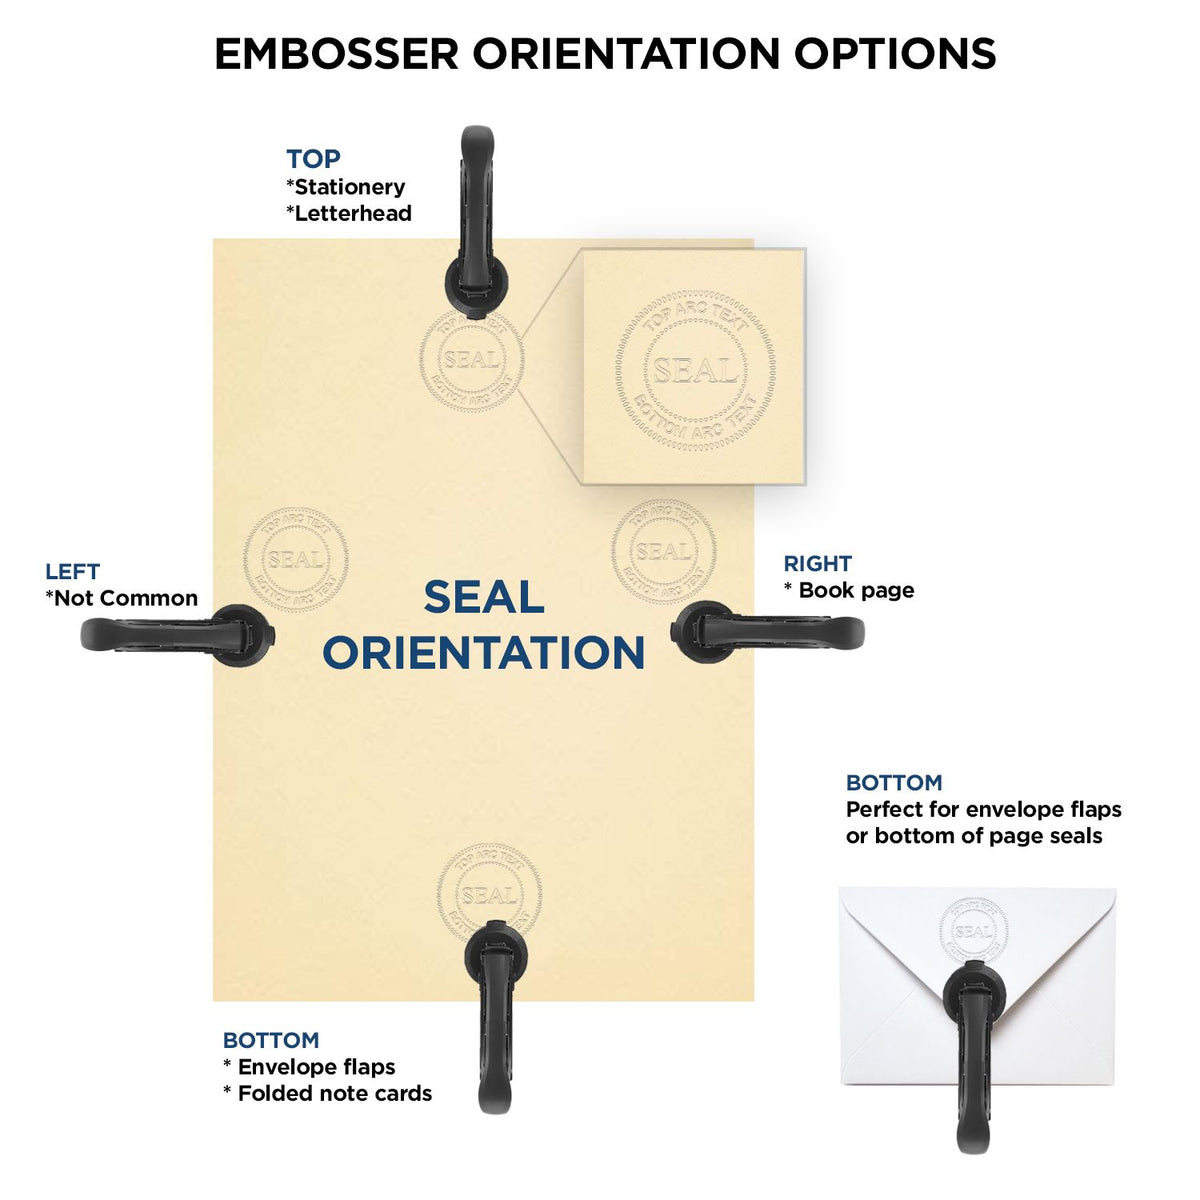 An infographic for the Illinois Engineer Desk Seal showing embosser orientation, this is showing examples of a top, bottom, right and left insert.